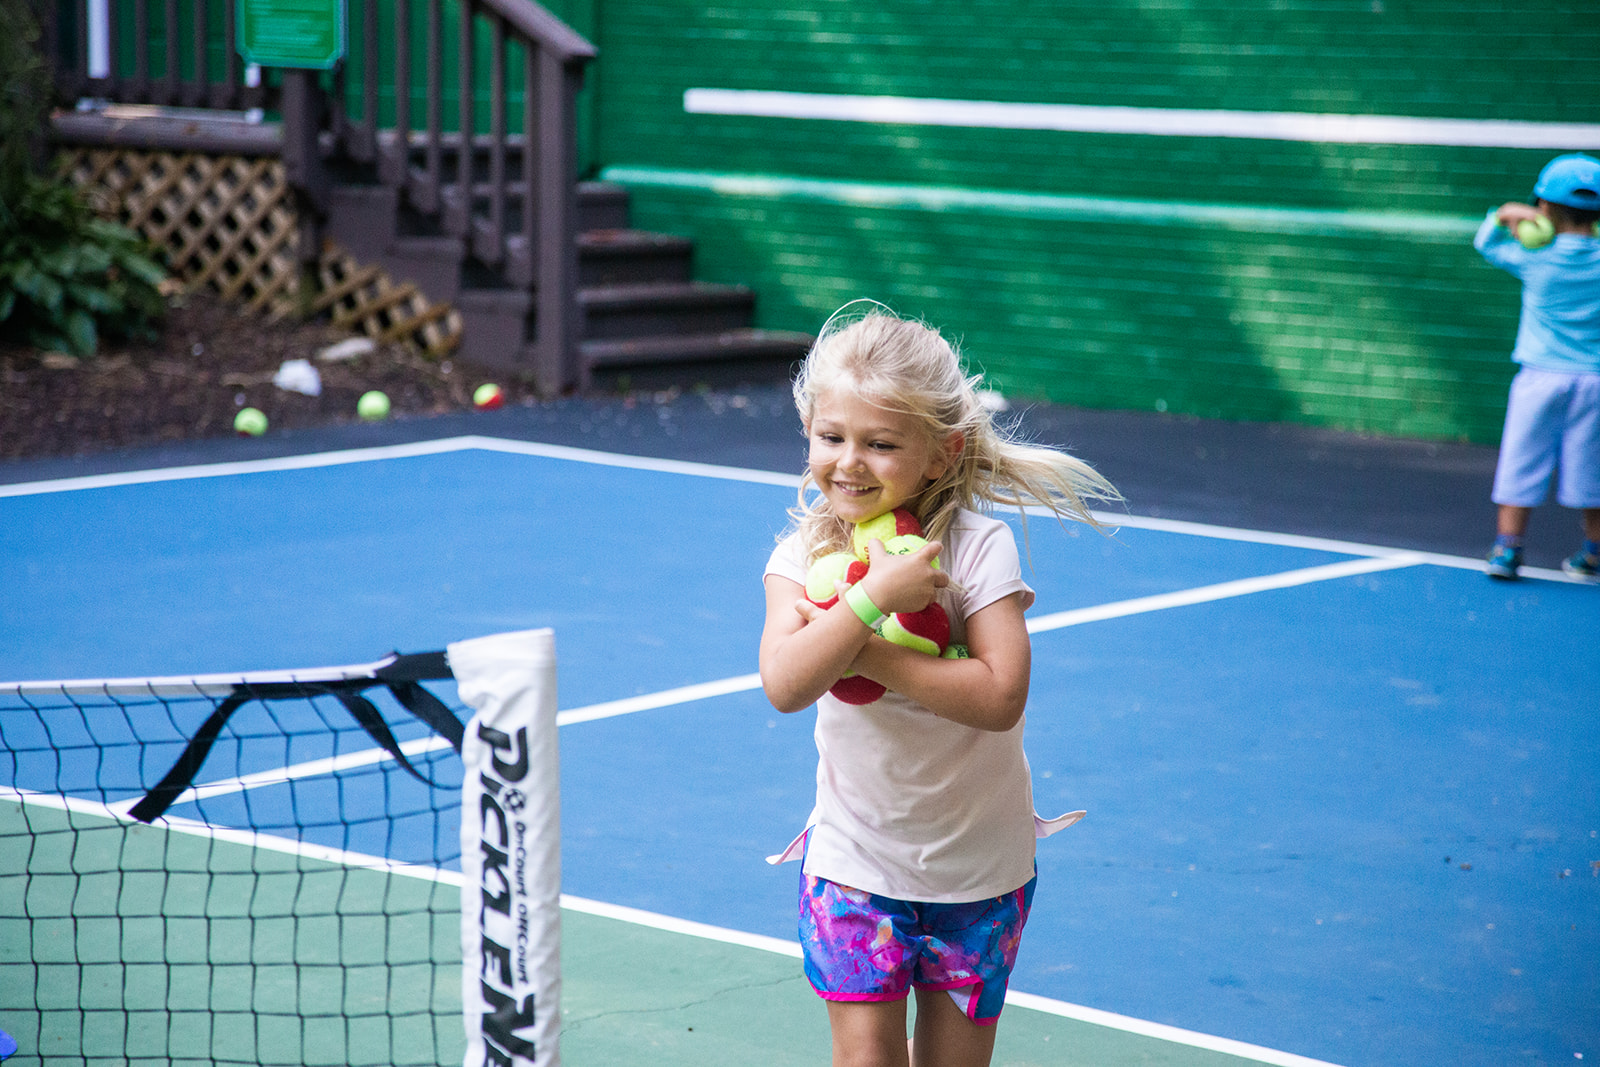 Photo of a smiling young blonde girl on an outdoor tennis court at Hollin Meadows Swim and Tennis Club holding armfuls of tennis balls.